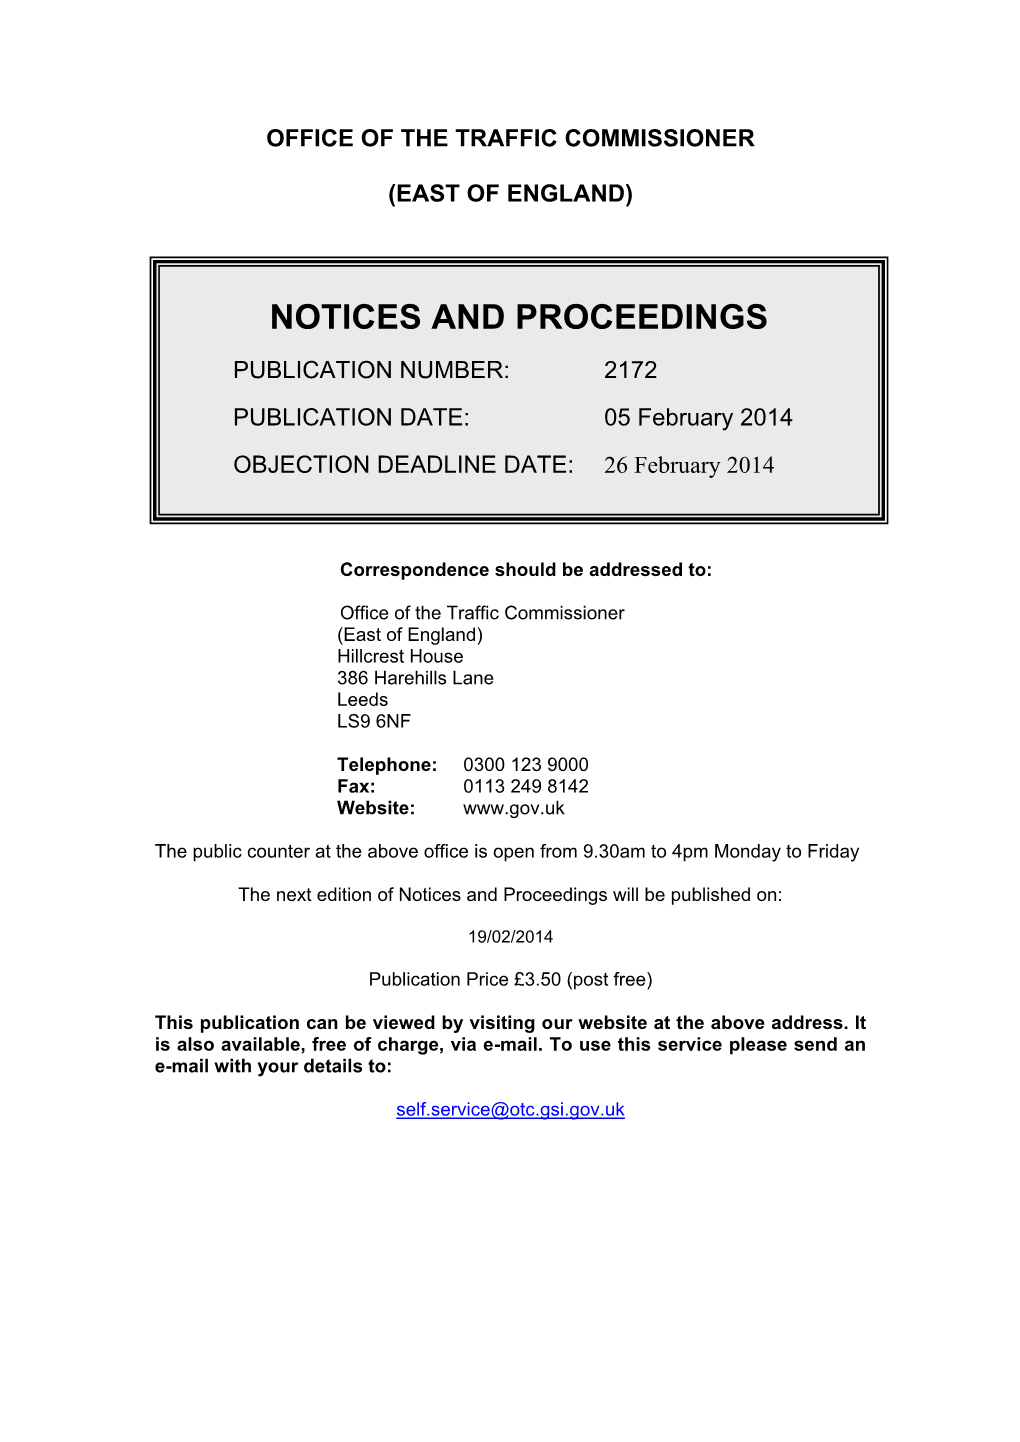 Notices and Proceedings